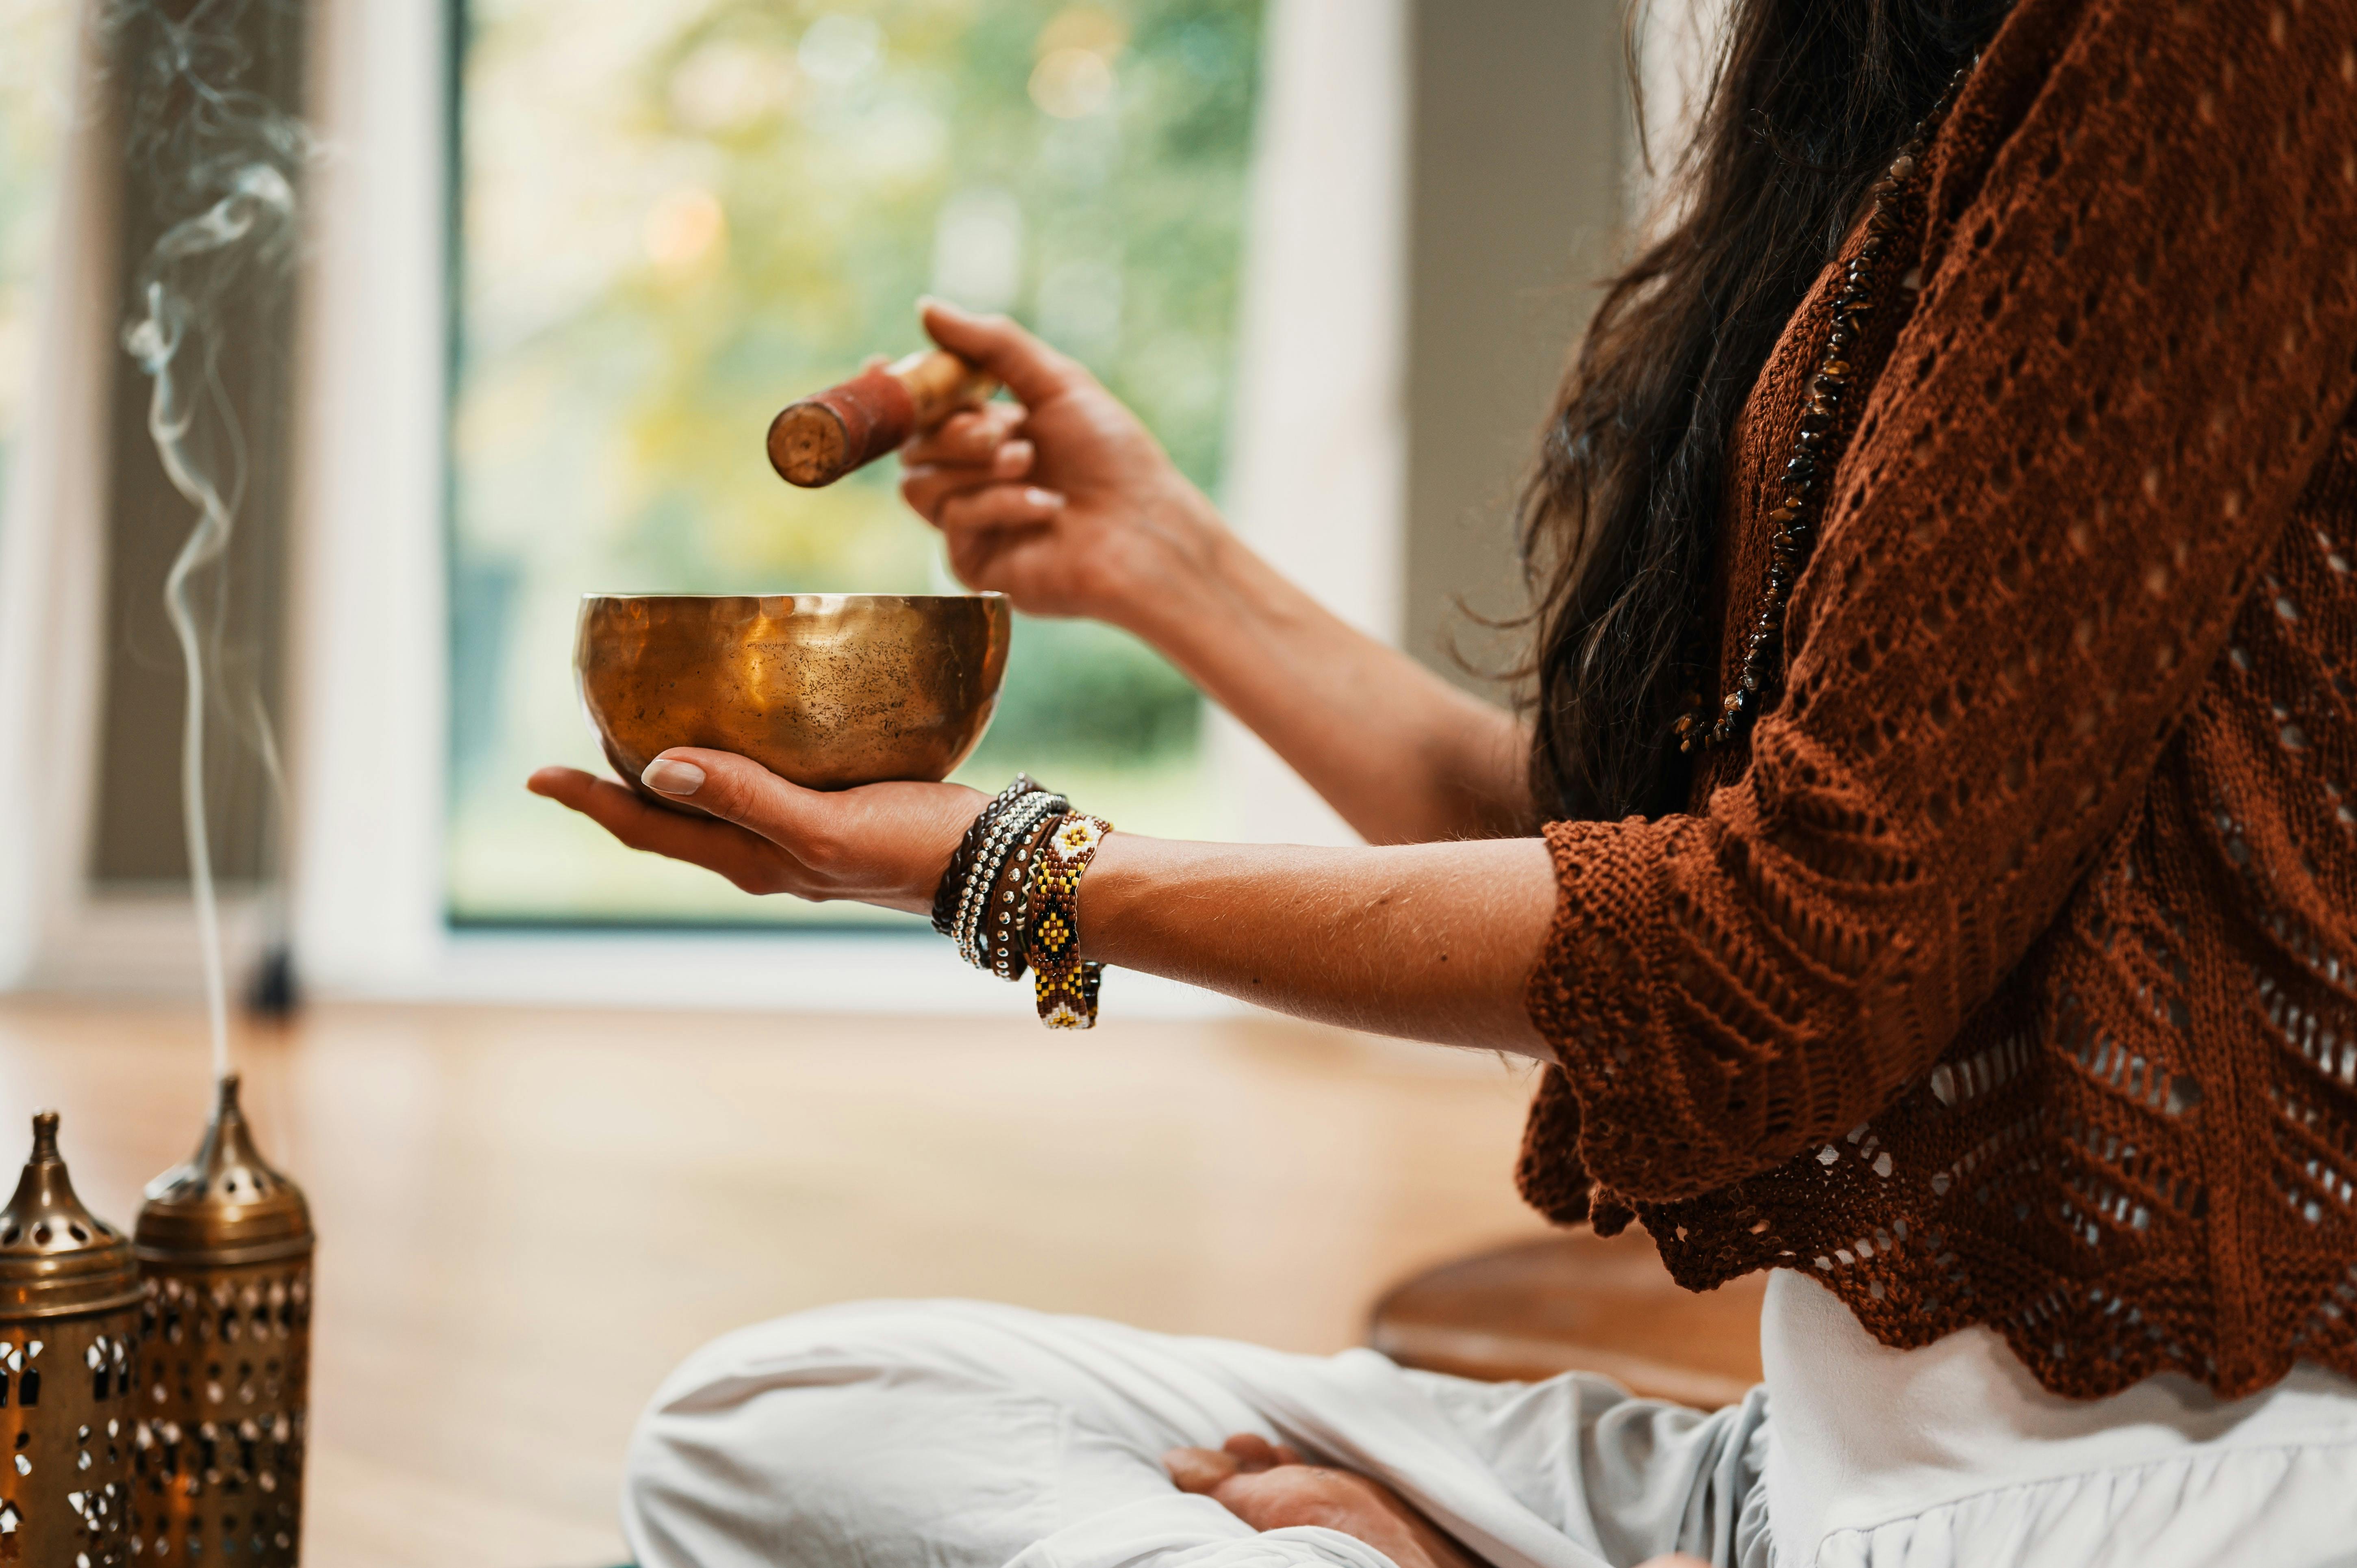 Relax and zen out with a calming sound healing session